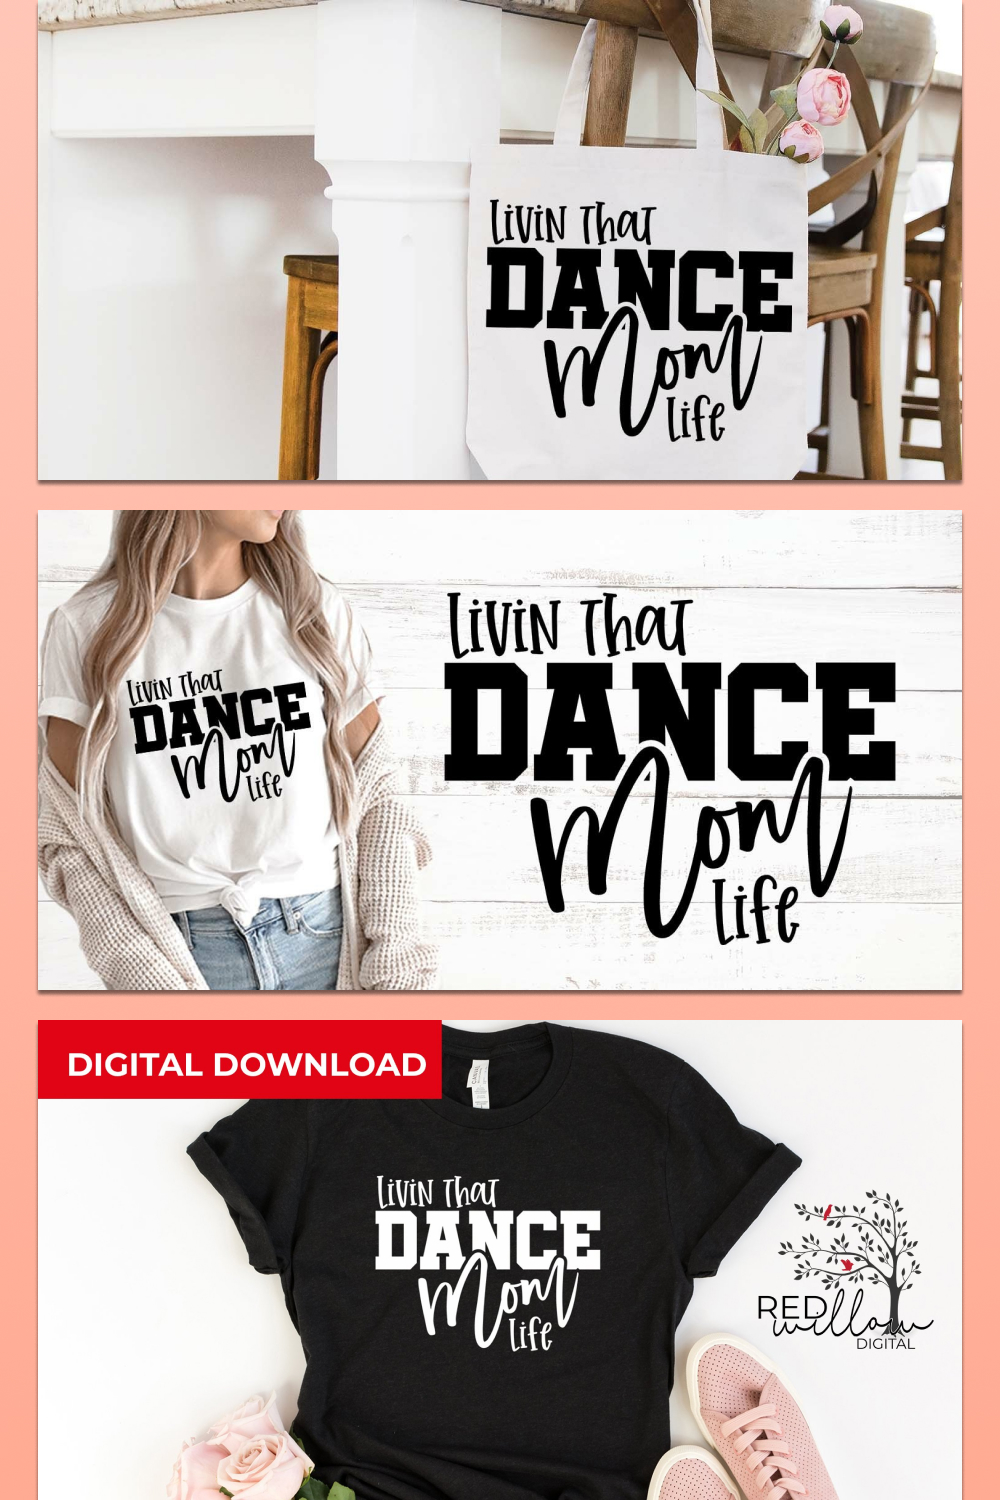 Preview of images on the topic of dancing with mommy.